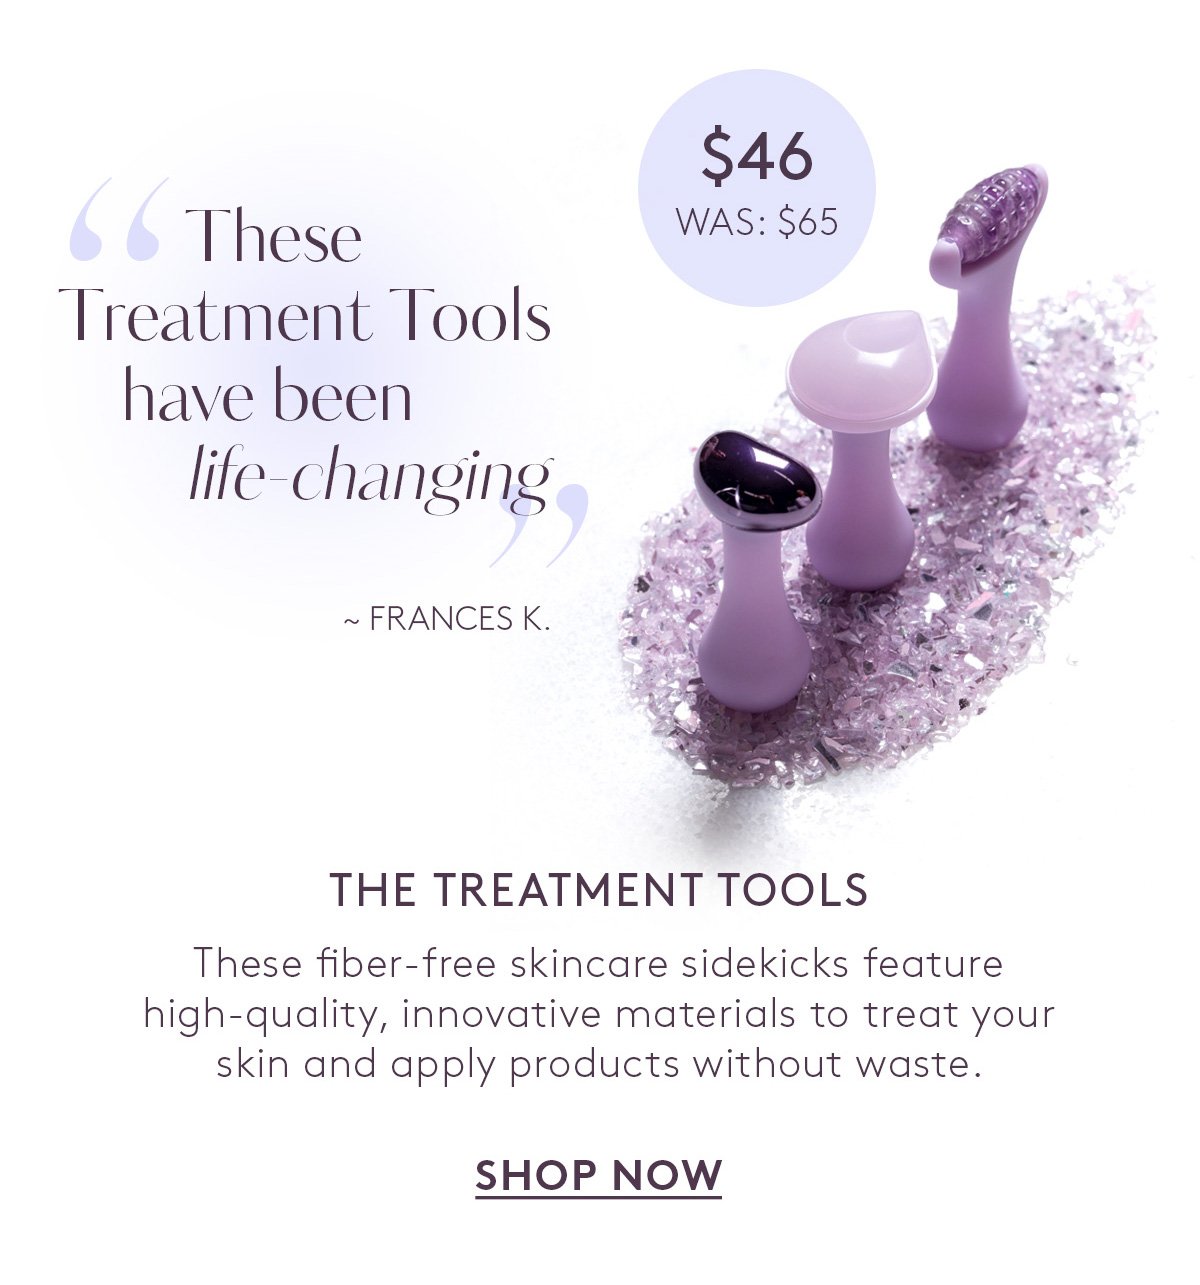 The Treatment Tools. Now: \\$46 (was: \\$65).